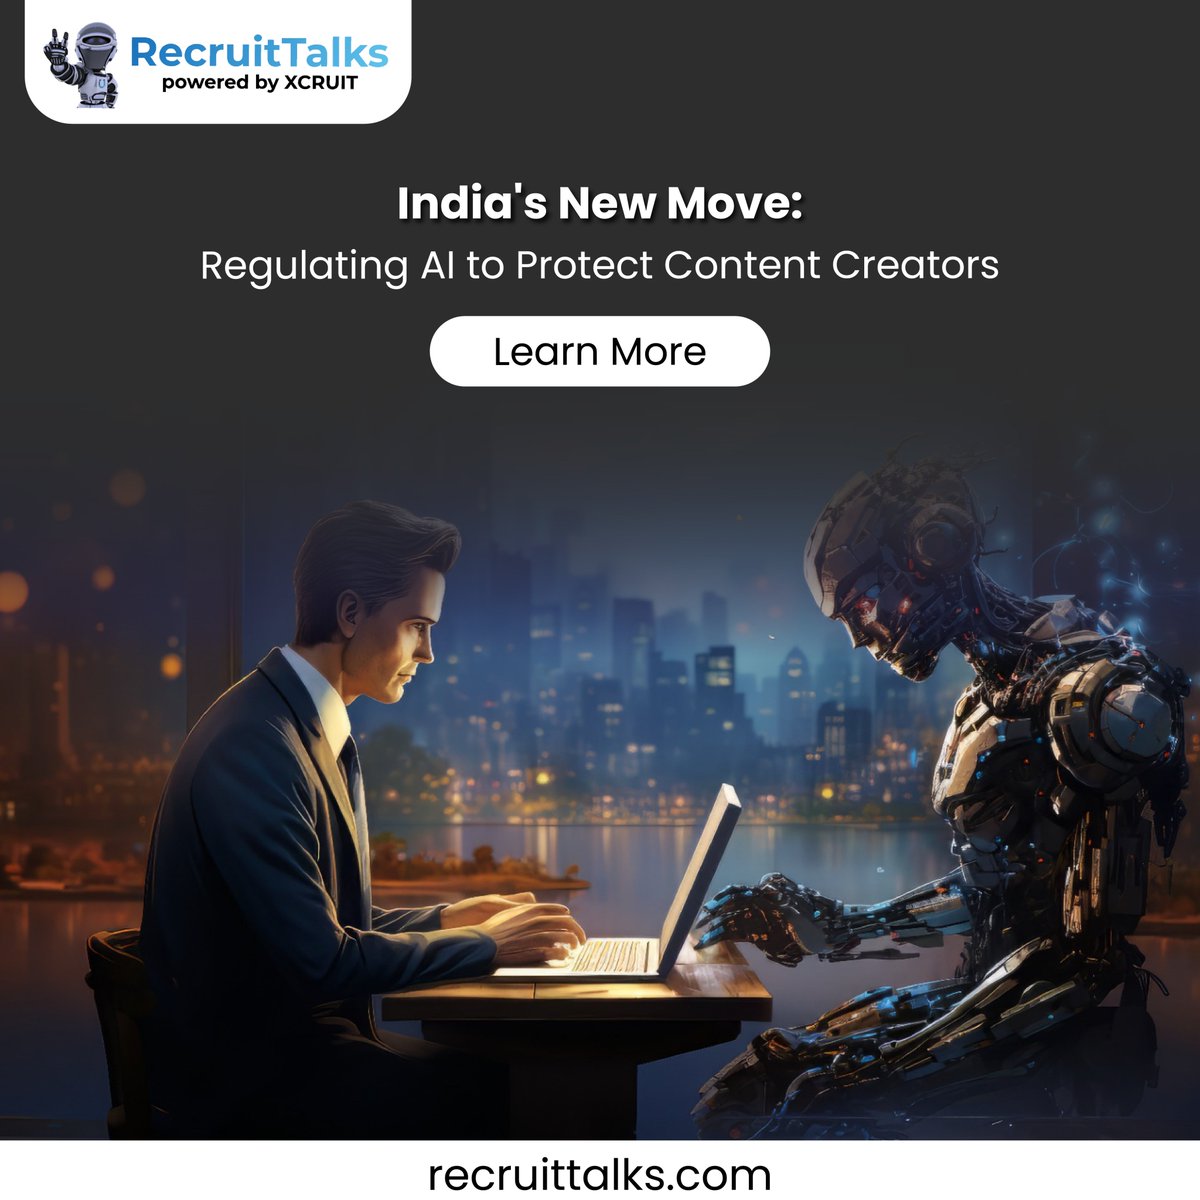 Now Read Today!
Explore India's New Move: Regulating AI to Protect Content Creators
Link: bit.ly/3U7BAWx
.
.
.
#Recruitorr #IamRecruitorr #indiangovernment  #ContentCreator #AIRegulation